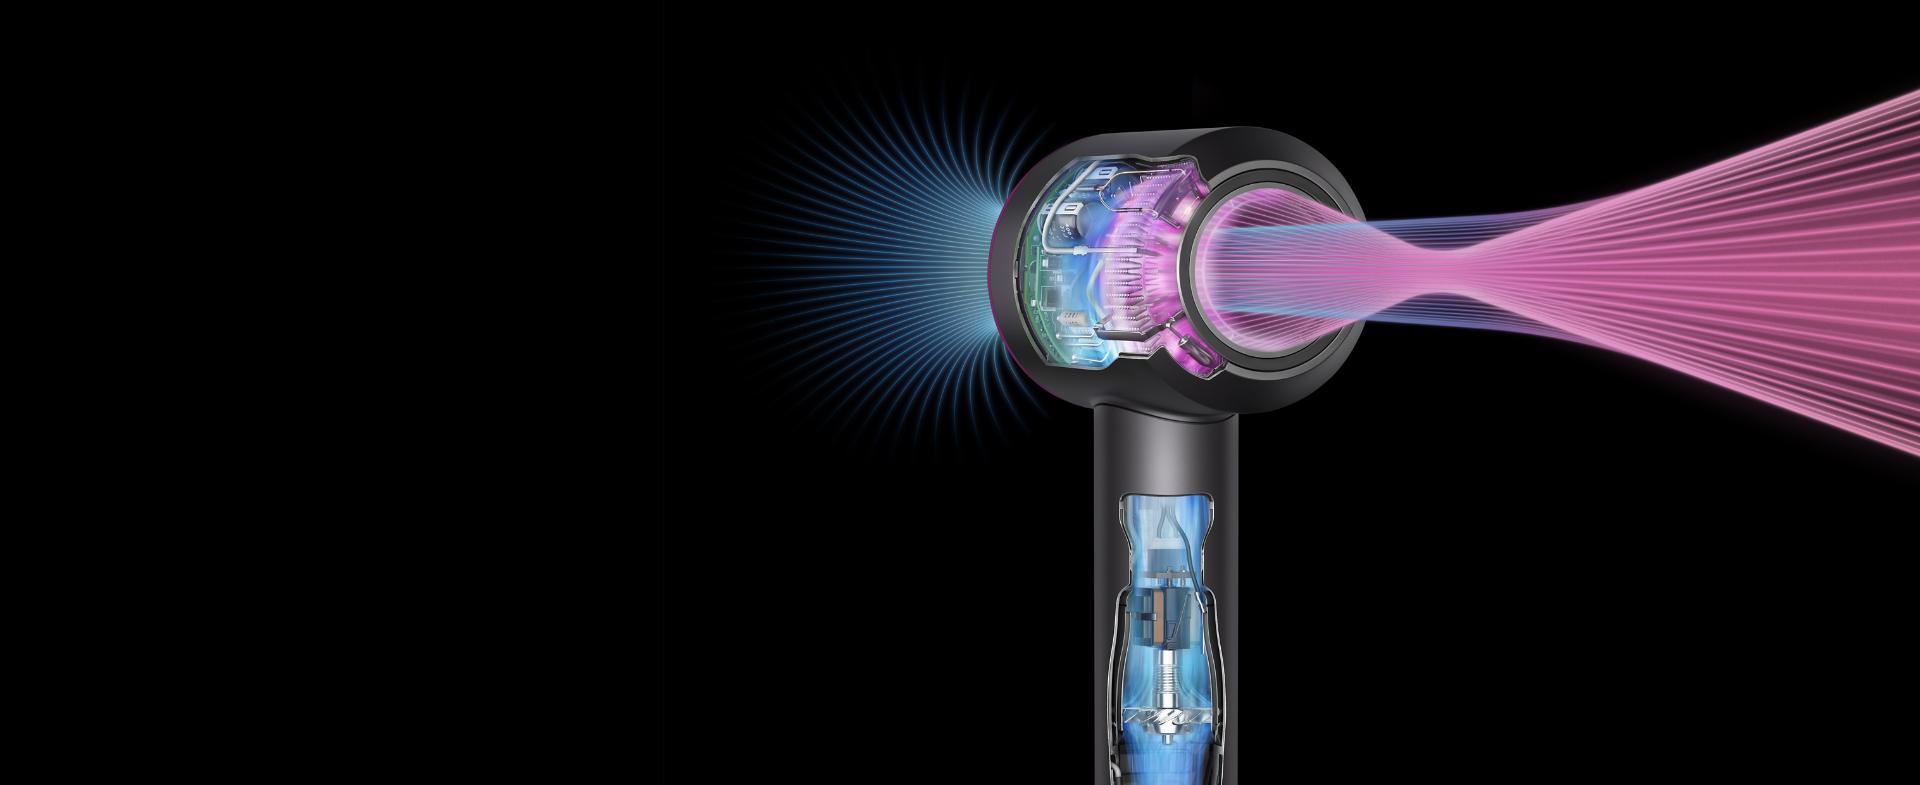 X-ray of the technology inside the Dyson Supersonic hair dryer